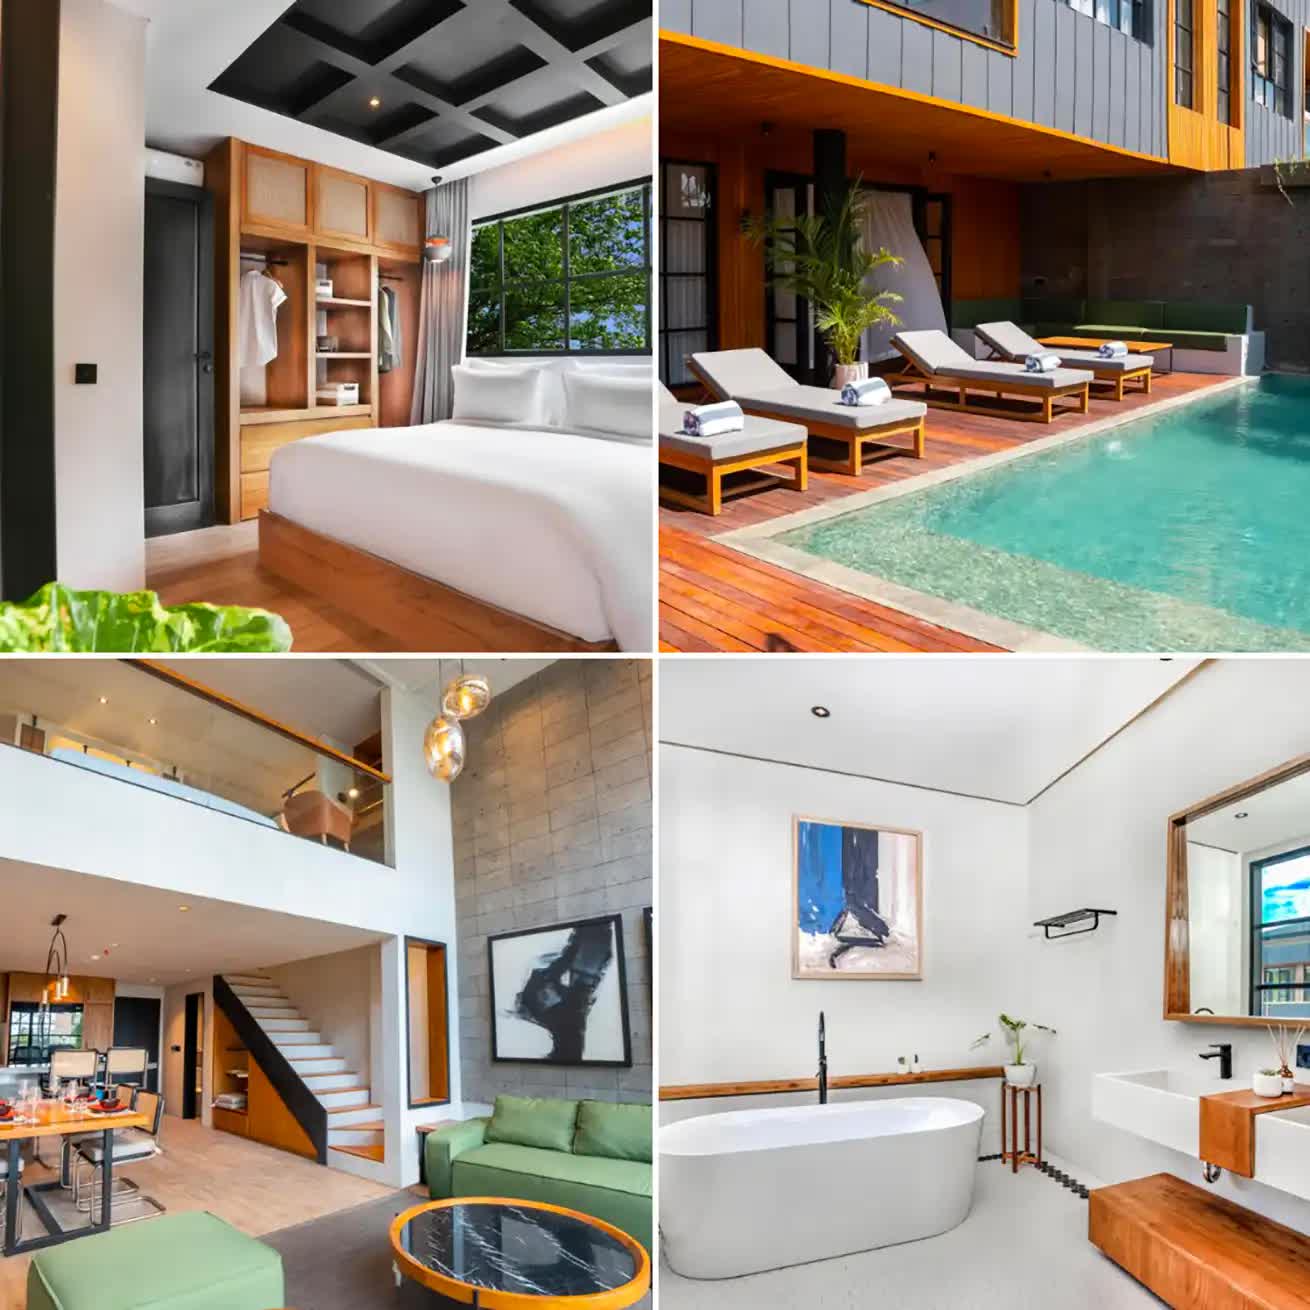 Interior of a bedroom, bathroom and living room with access to the pool in Secana Beachtown